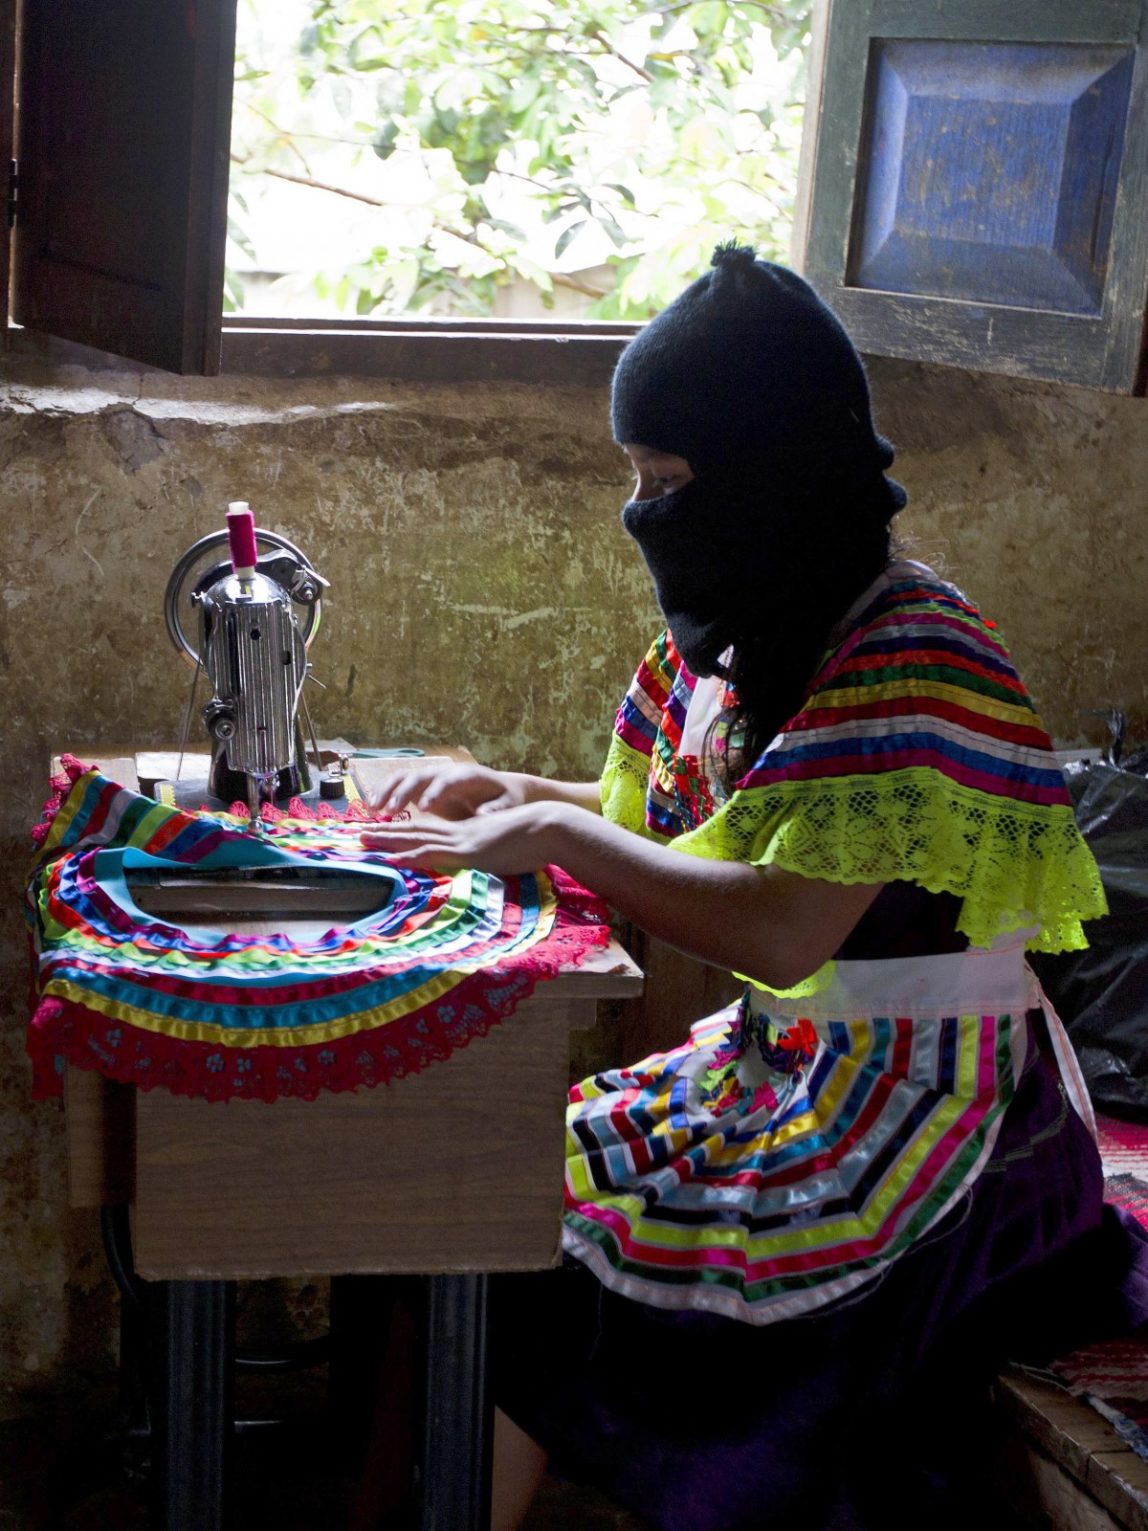 In this Dec. 27, 2013 photo, a woman sews part of a traditional skirt in the Zapatista controlled community of La Garrucha, Mexico. Since their uprising 20 years ago, Zapatistas, known by their initials as the EZLN, have lived in secretive, closed-off enclaves they have formed in the half-dozen communities they hold. But in the last five months the rebels have opened up their communities to more than 7,000 Mexicans and foreigners interested in learning about how they self-govern and maintain their independence and way of life. Those invited stayed for a week at a time and lived with a Zapatista family. Members of these communities wear masks to hide their identities when outsiders, interested in learning about how they self-govern and maintain their way of life, gain access to visit them. (AP Photo/Christian Palma)